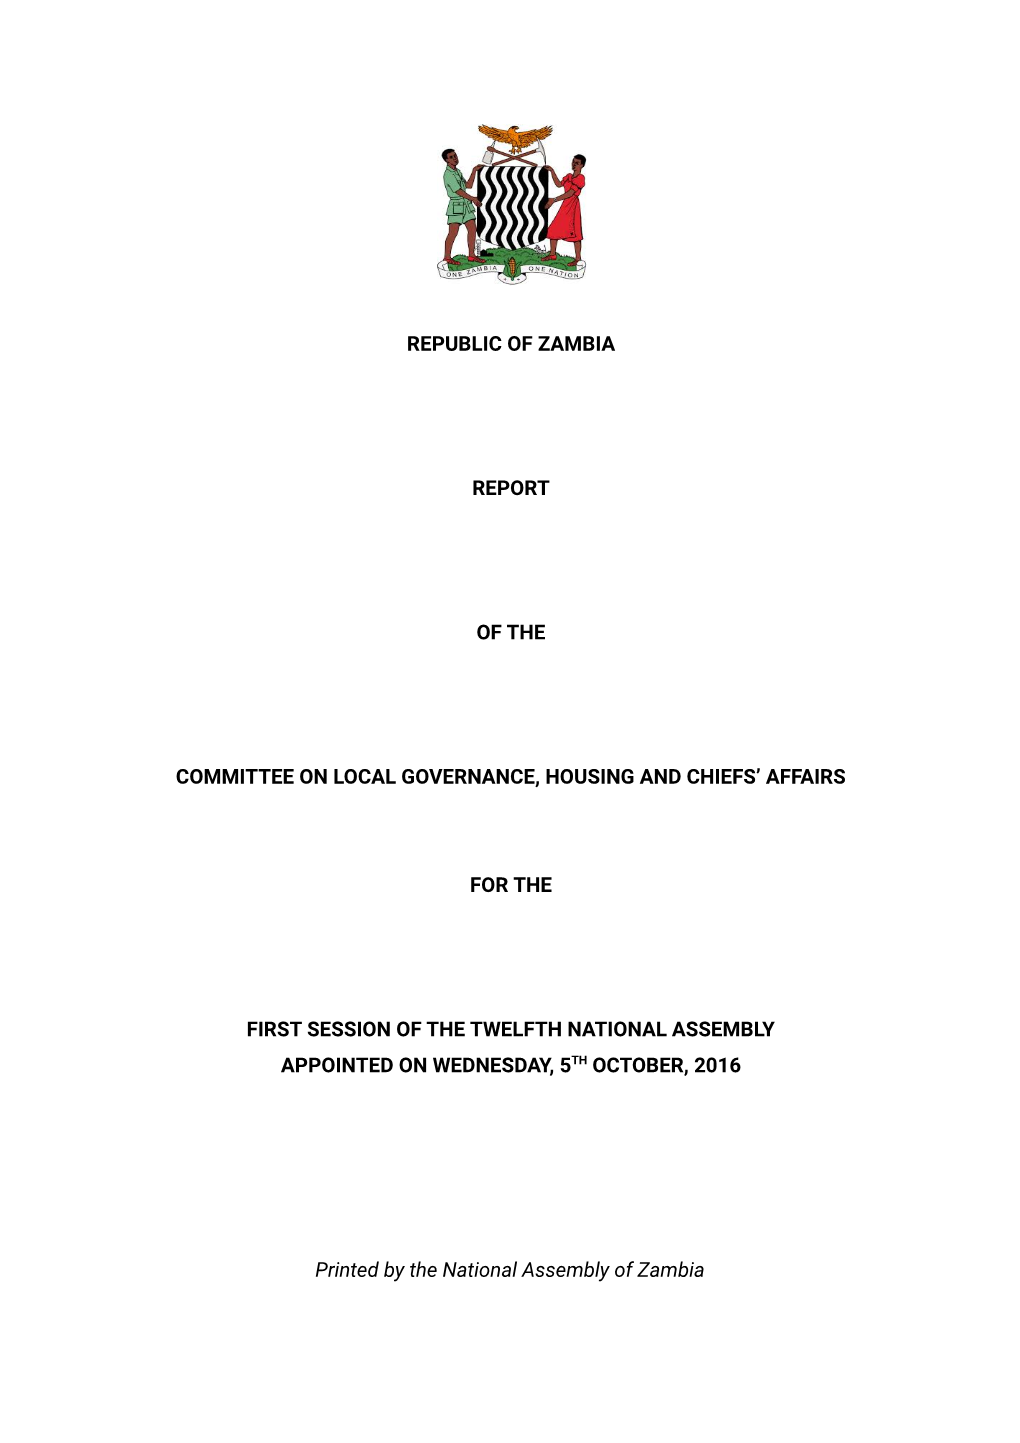 REPORT of the COMMITTEE on LOCAL GOVERNANCE Housing Sitution in Zambia.Pdf